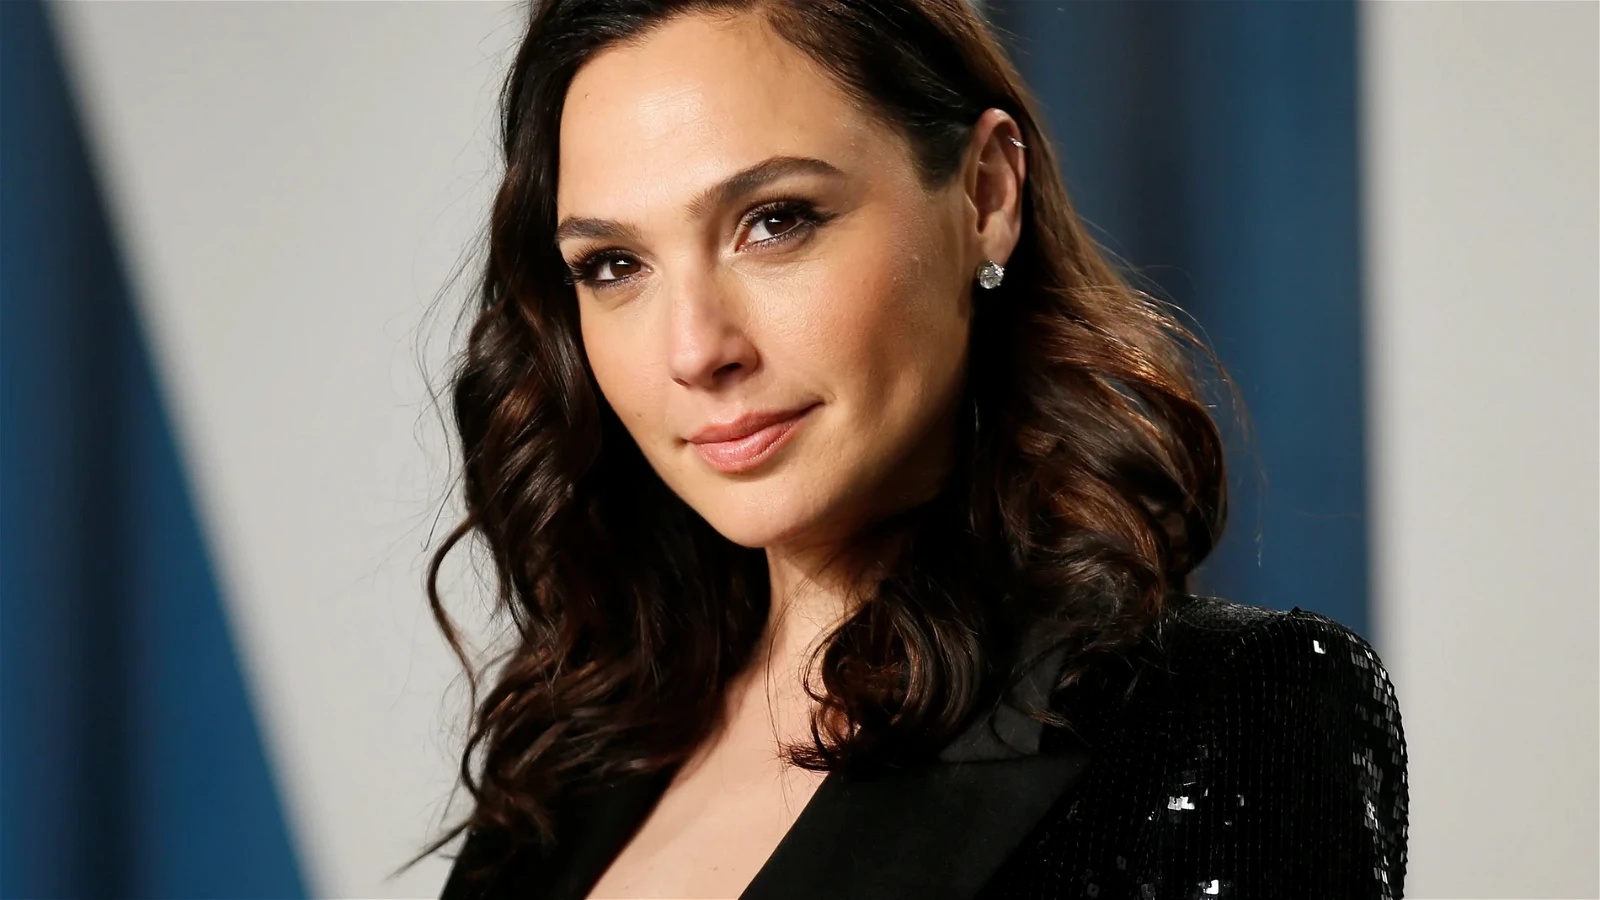 Gal Gadot is a Wonder Woman in real life